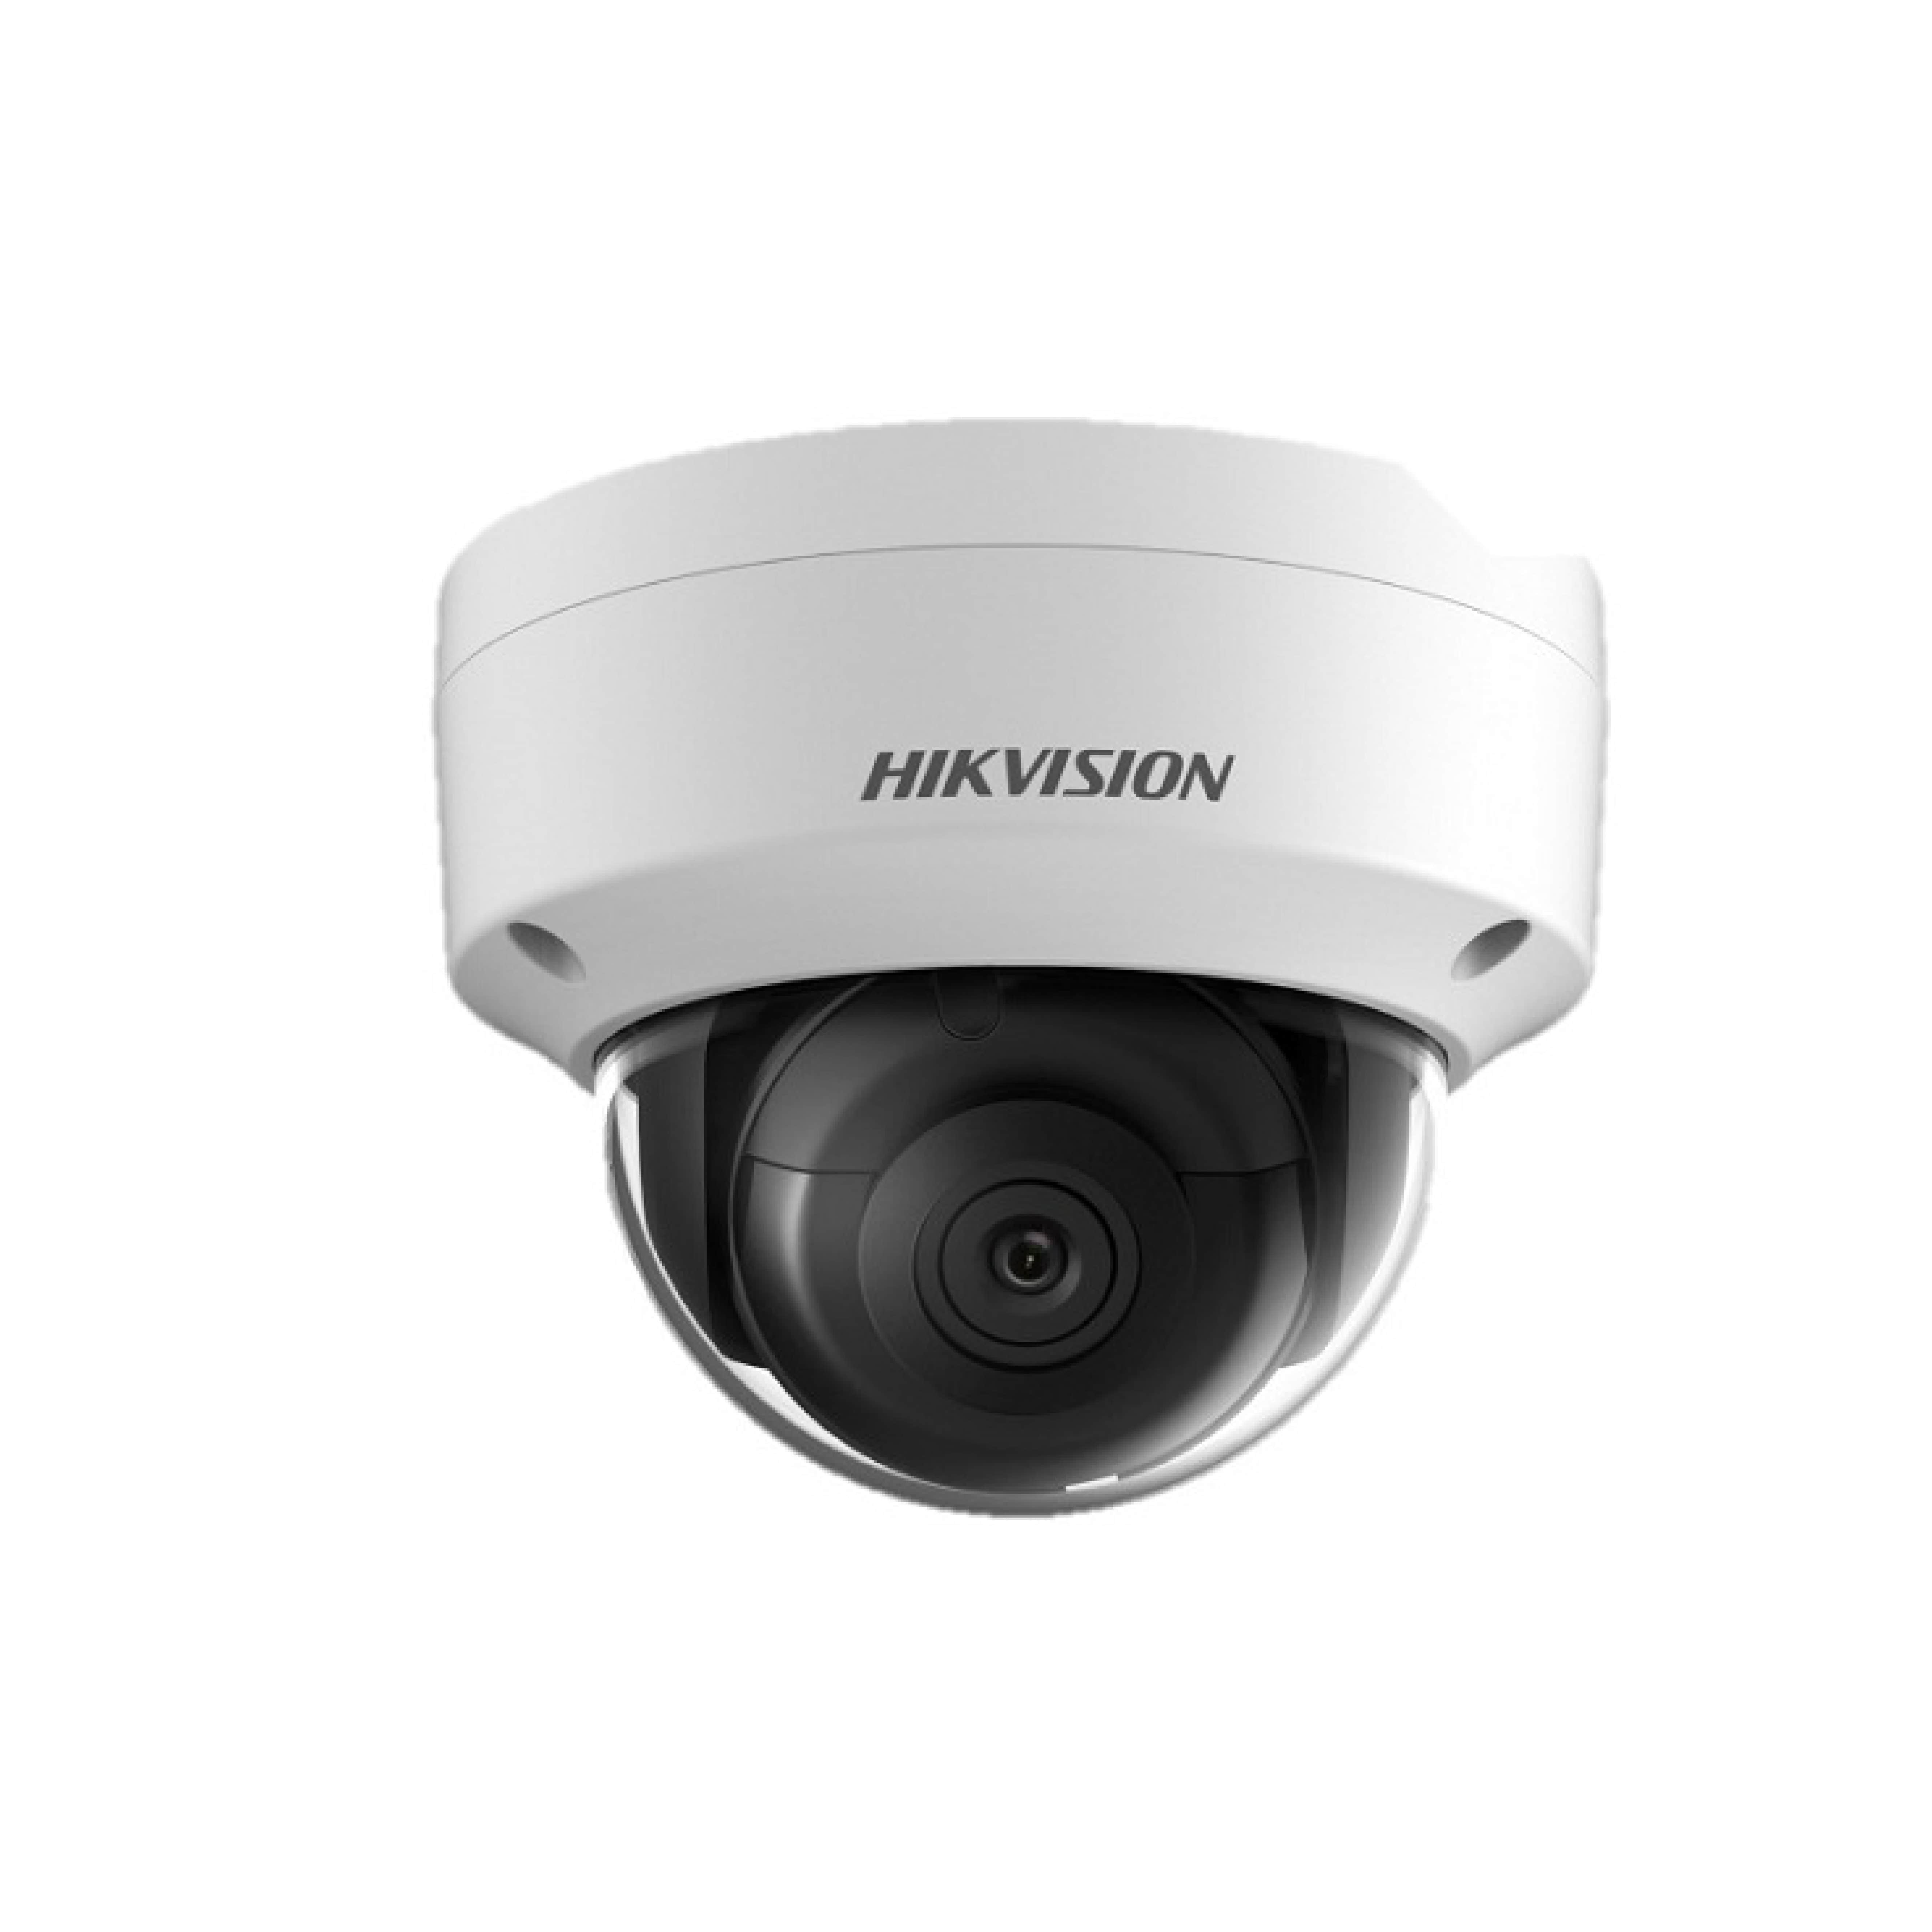 Mắt Camera IP Hikvision DS-2CD2163G0-I 6.0 Mpx lắp trong nhà